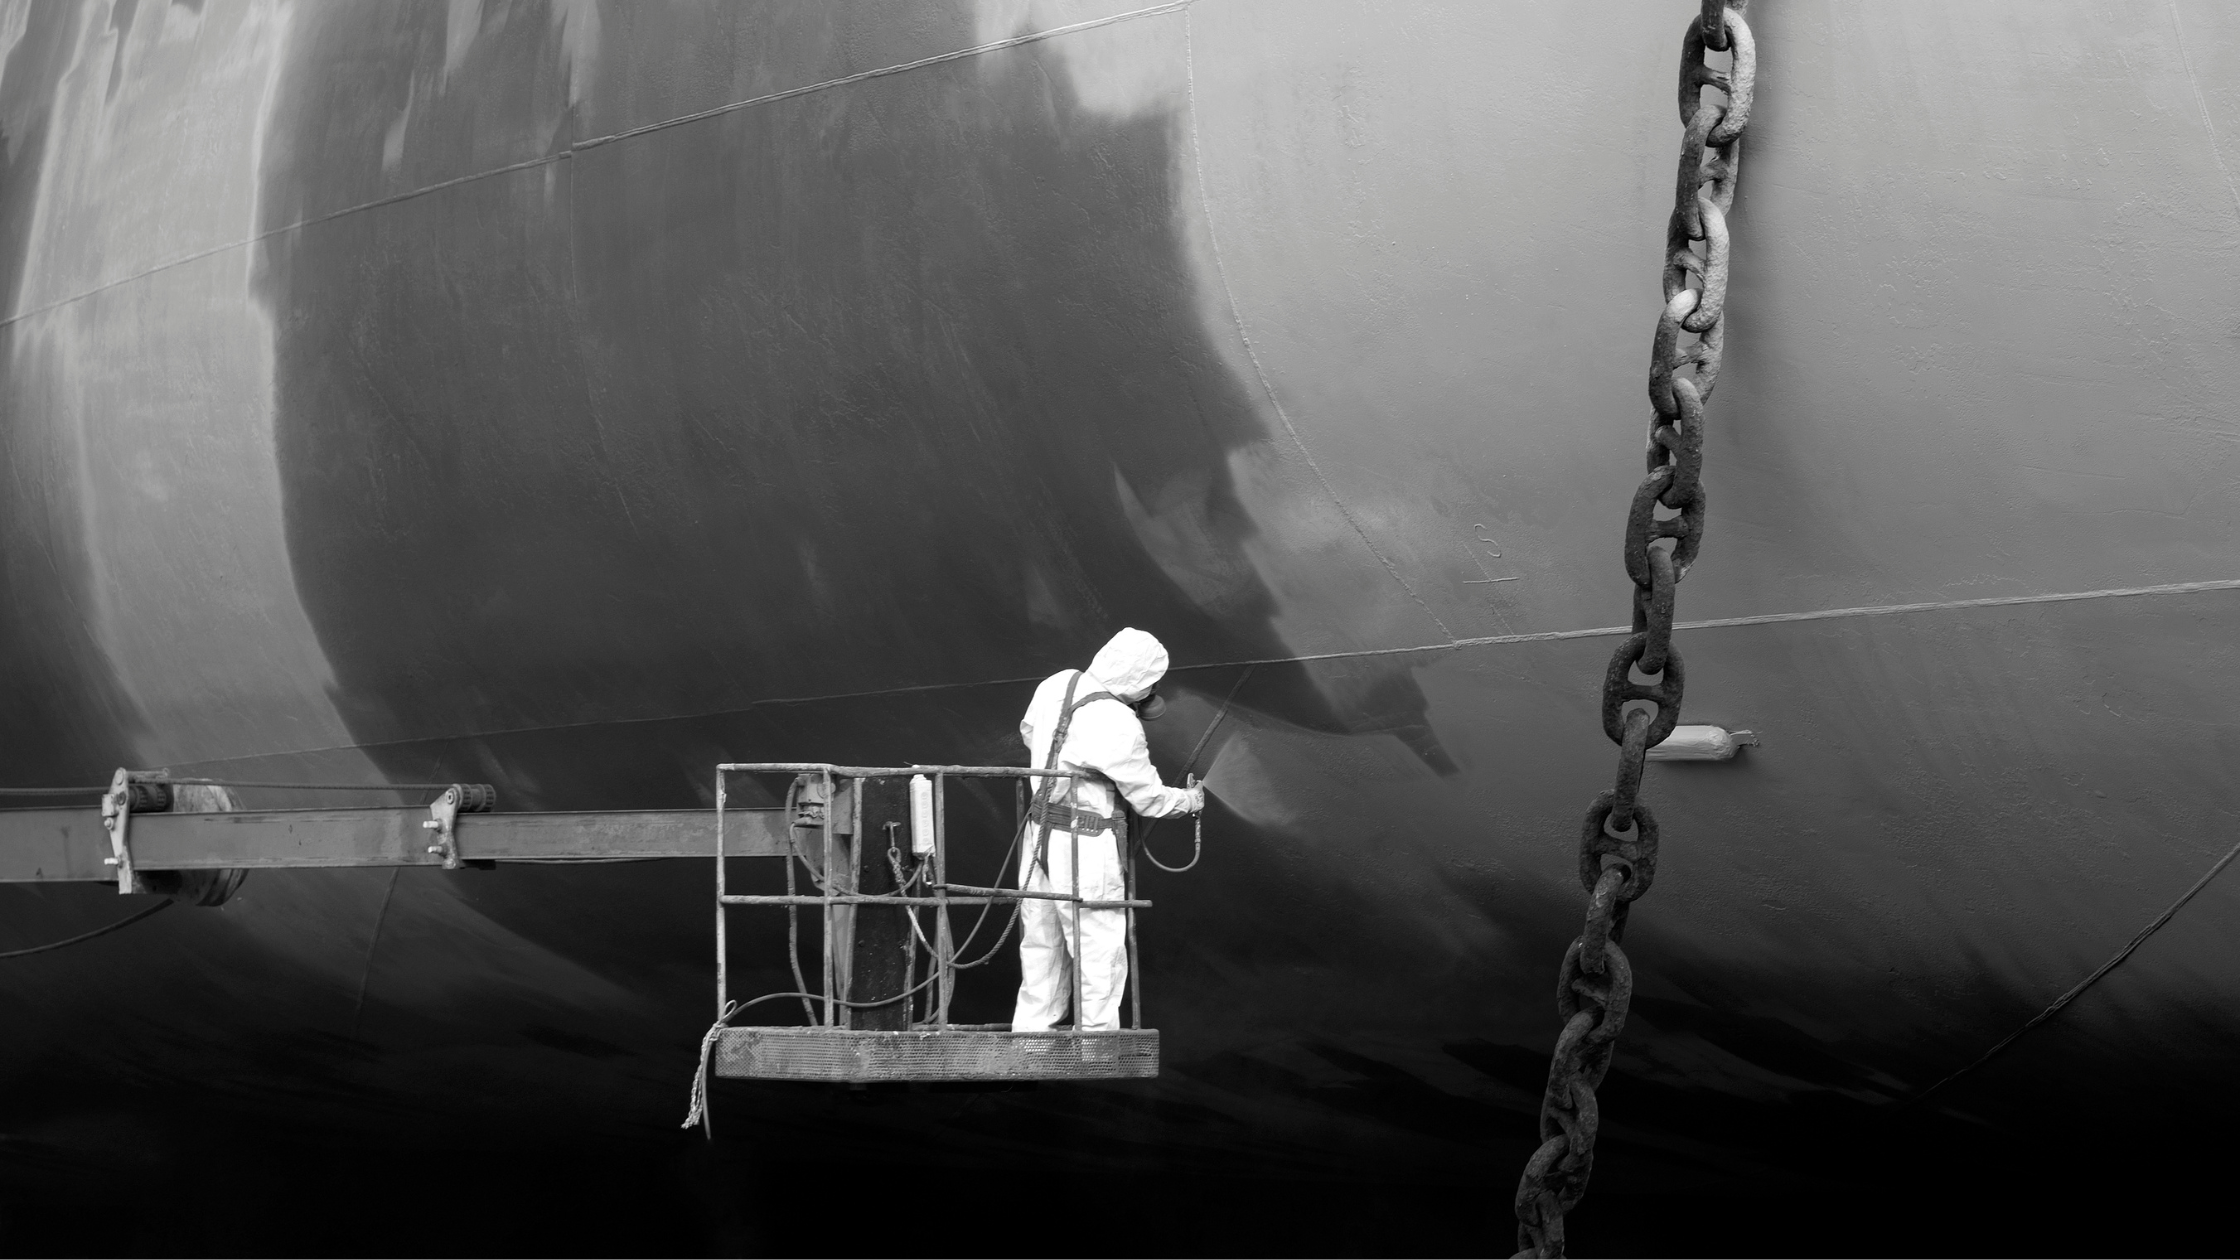 Man in protective clothing cleans ship. Paint used on ships could cause exposure to asbestos in shipyards